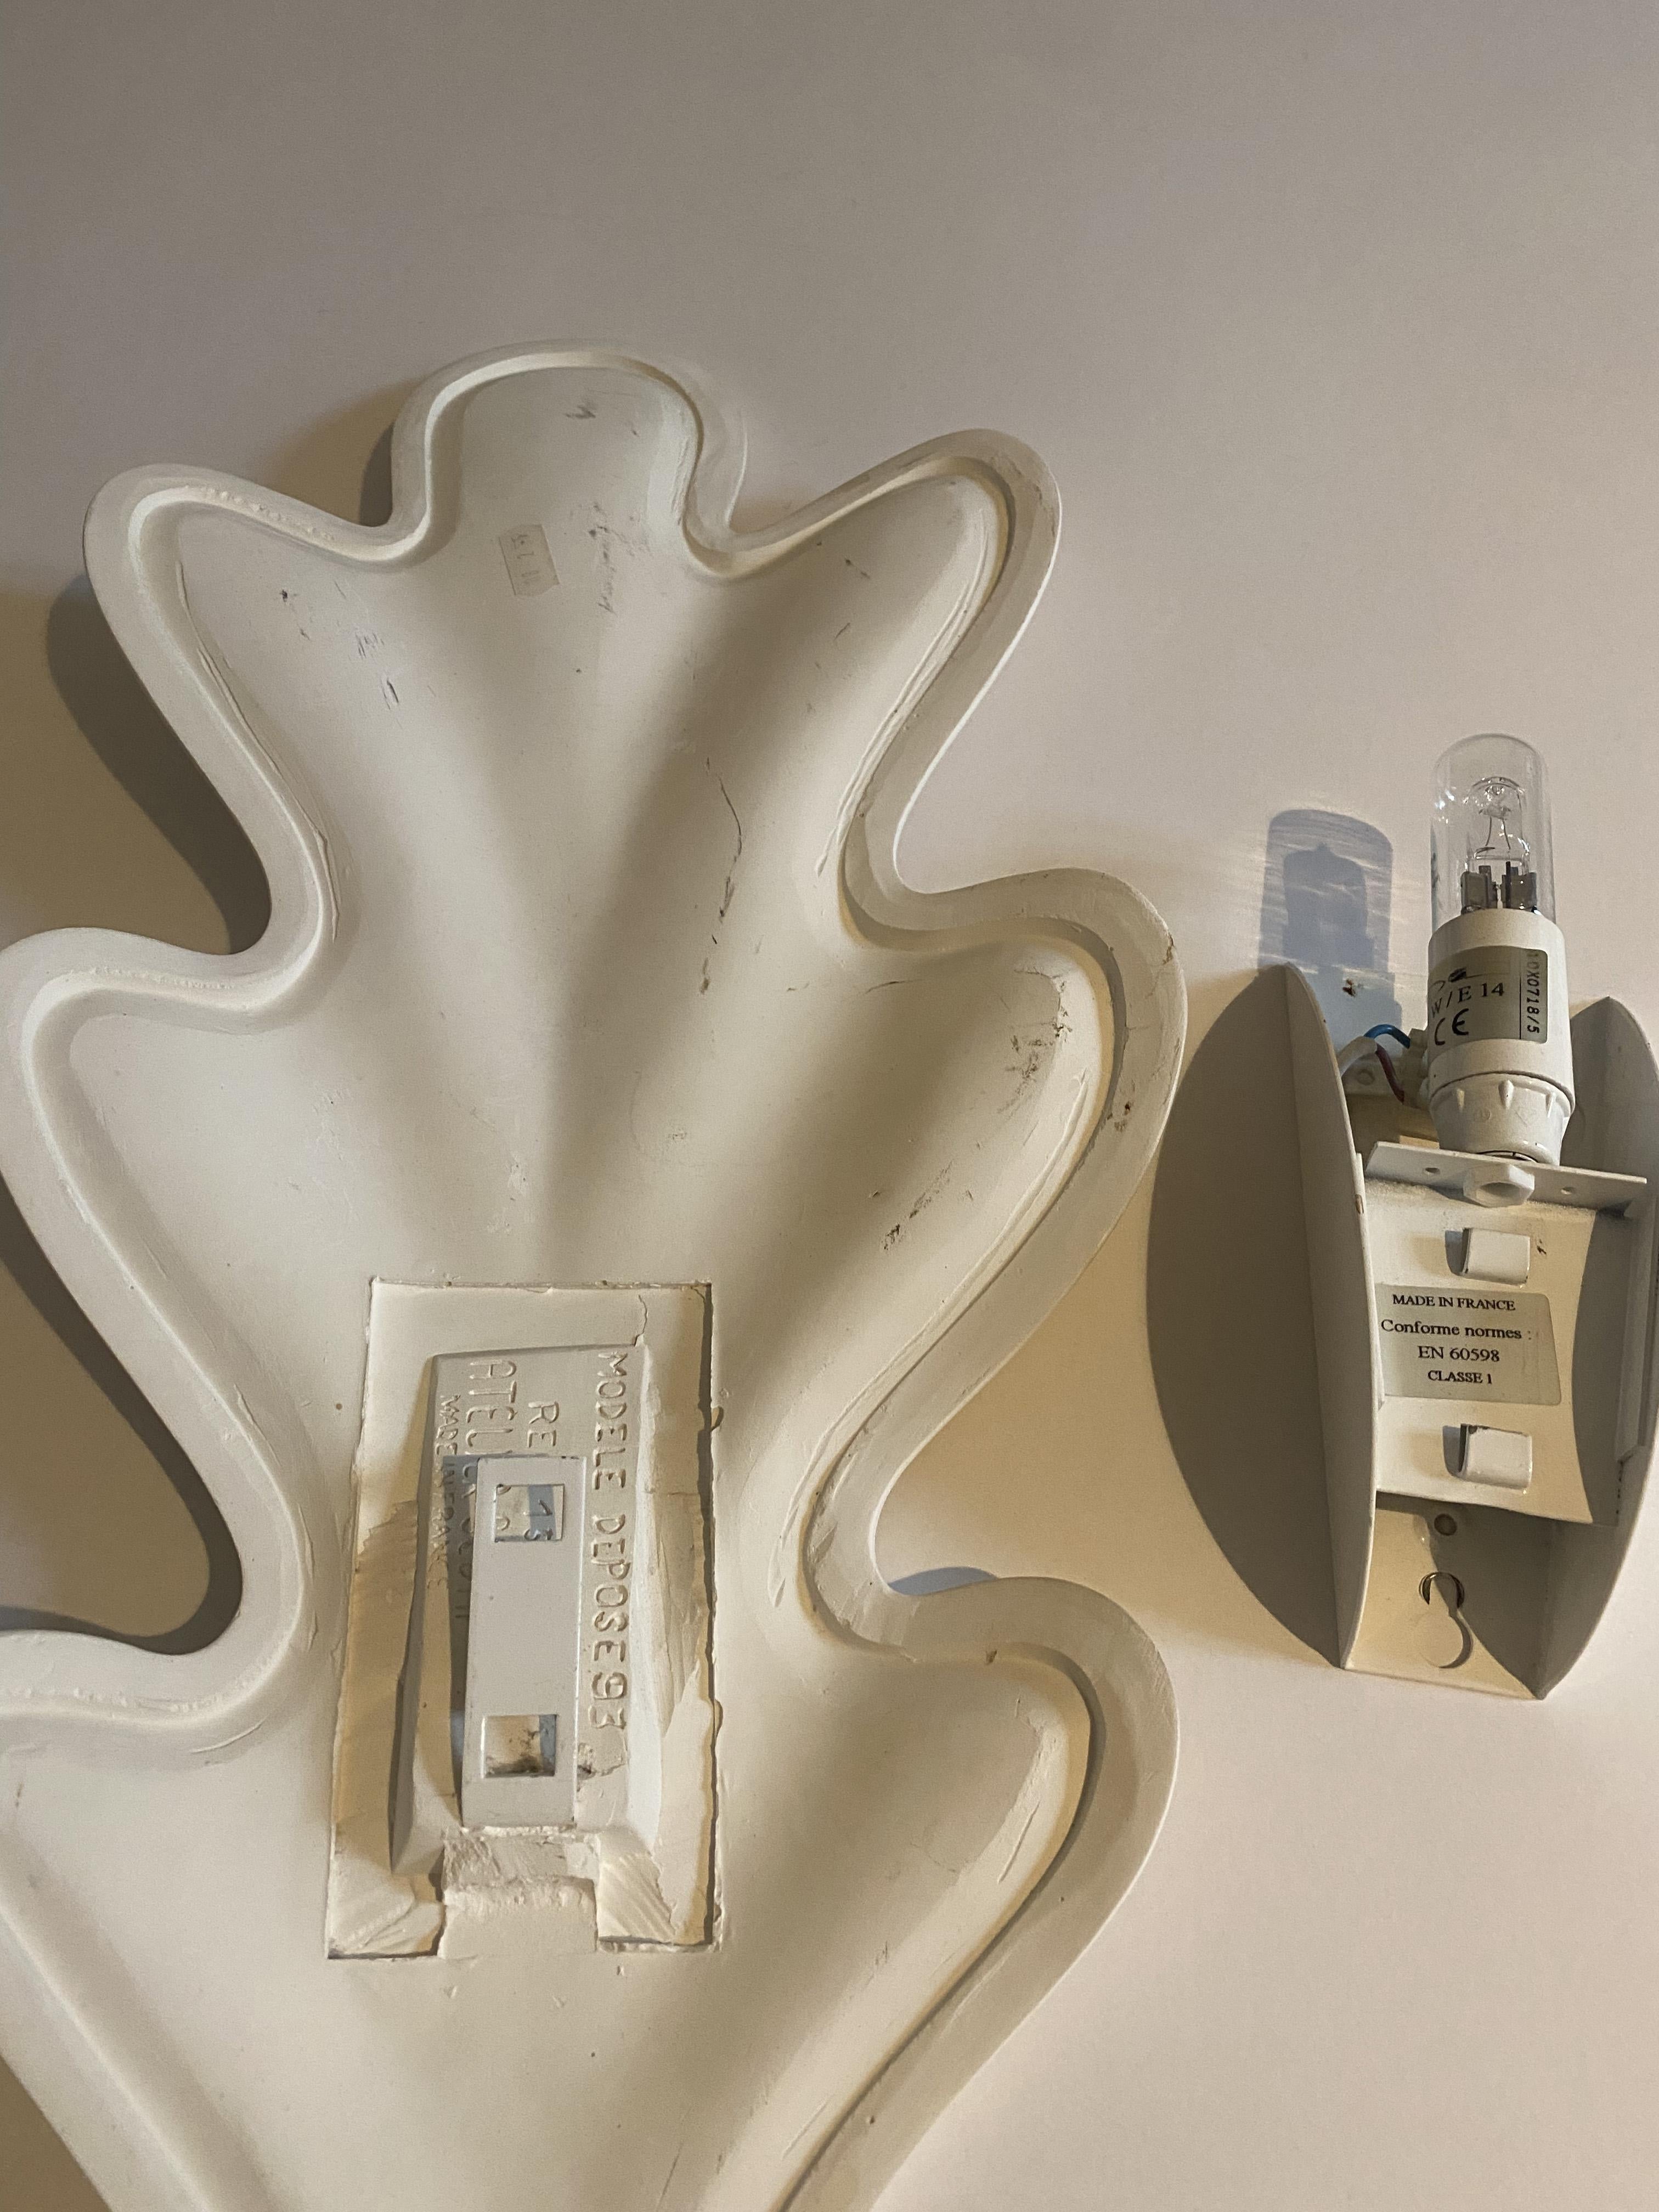 Late 20th Century French Plaster Oak Leaf Sconce by Atelier Sedap, 1990s.